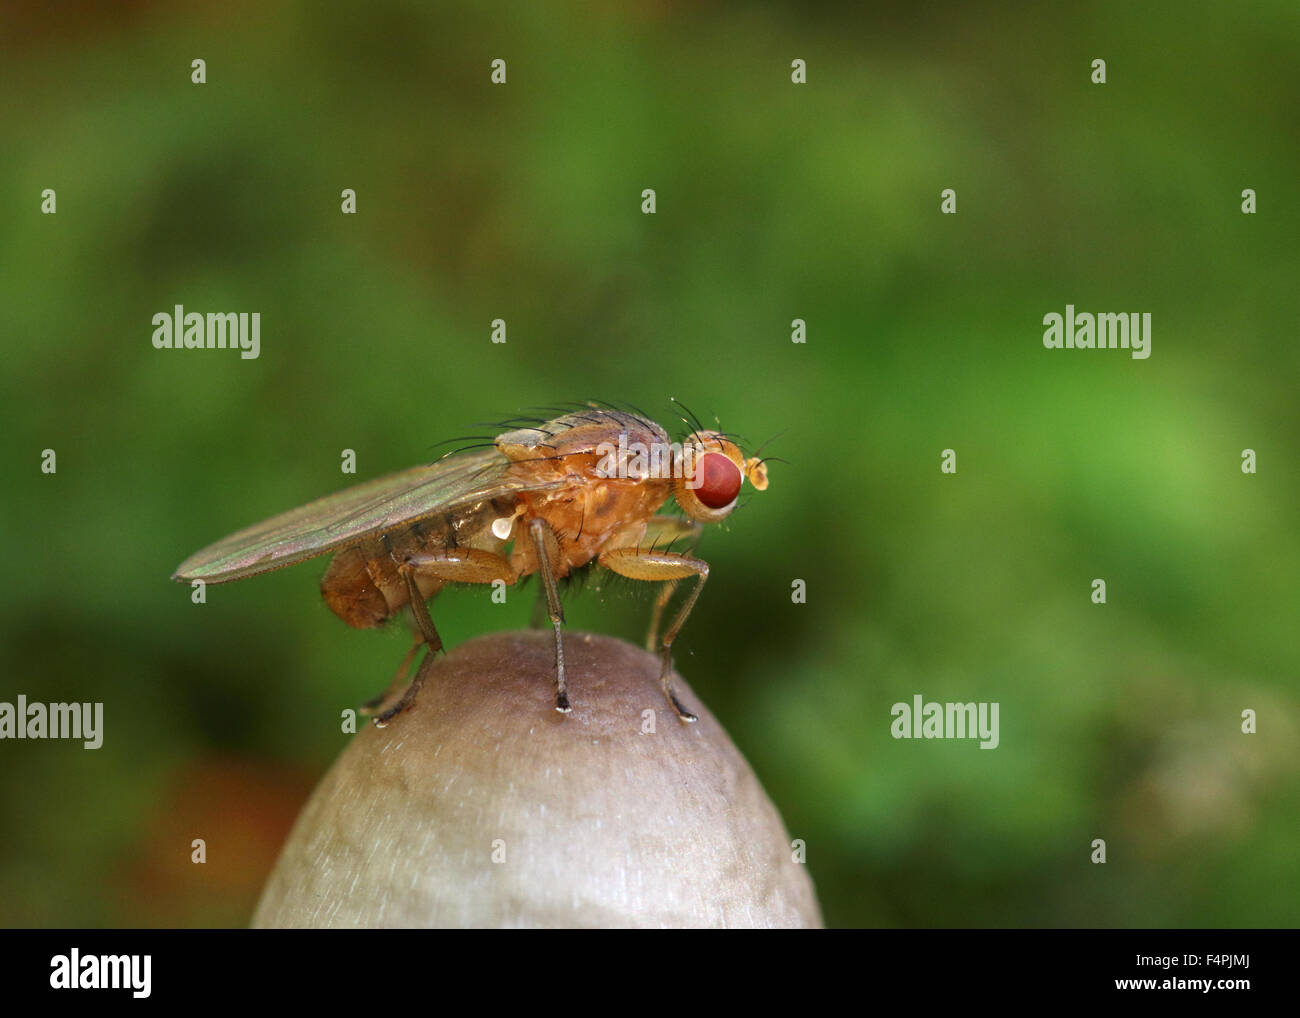 Clusiid fly using the top of a small fungi as a lekking ground to attract females Stock Photo